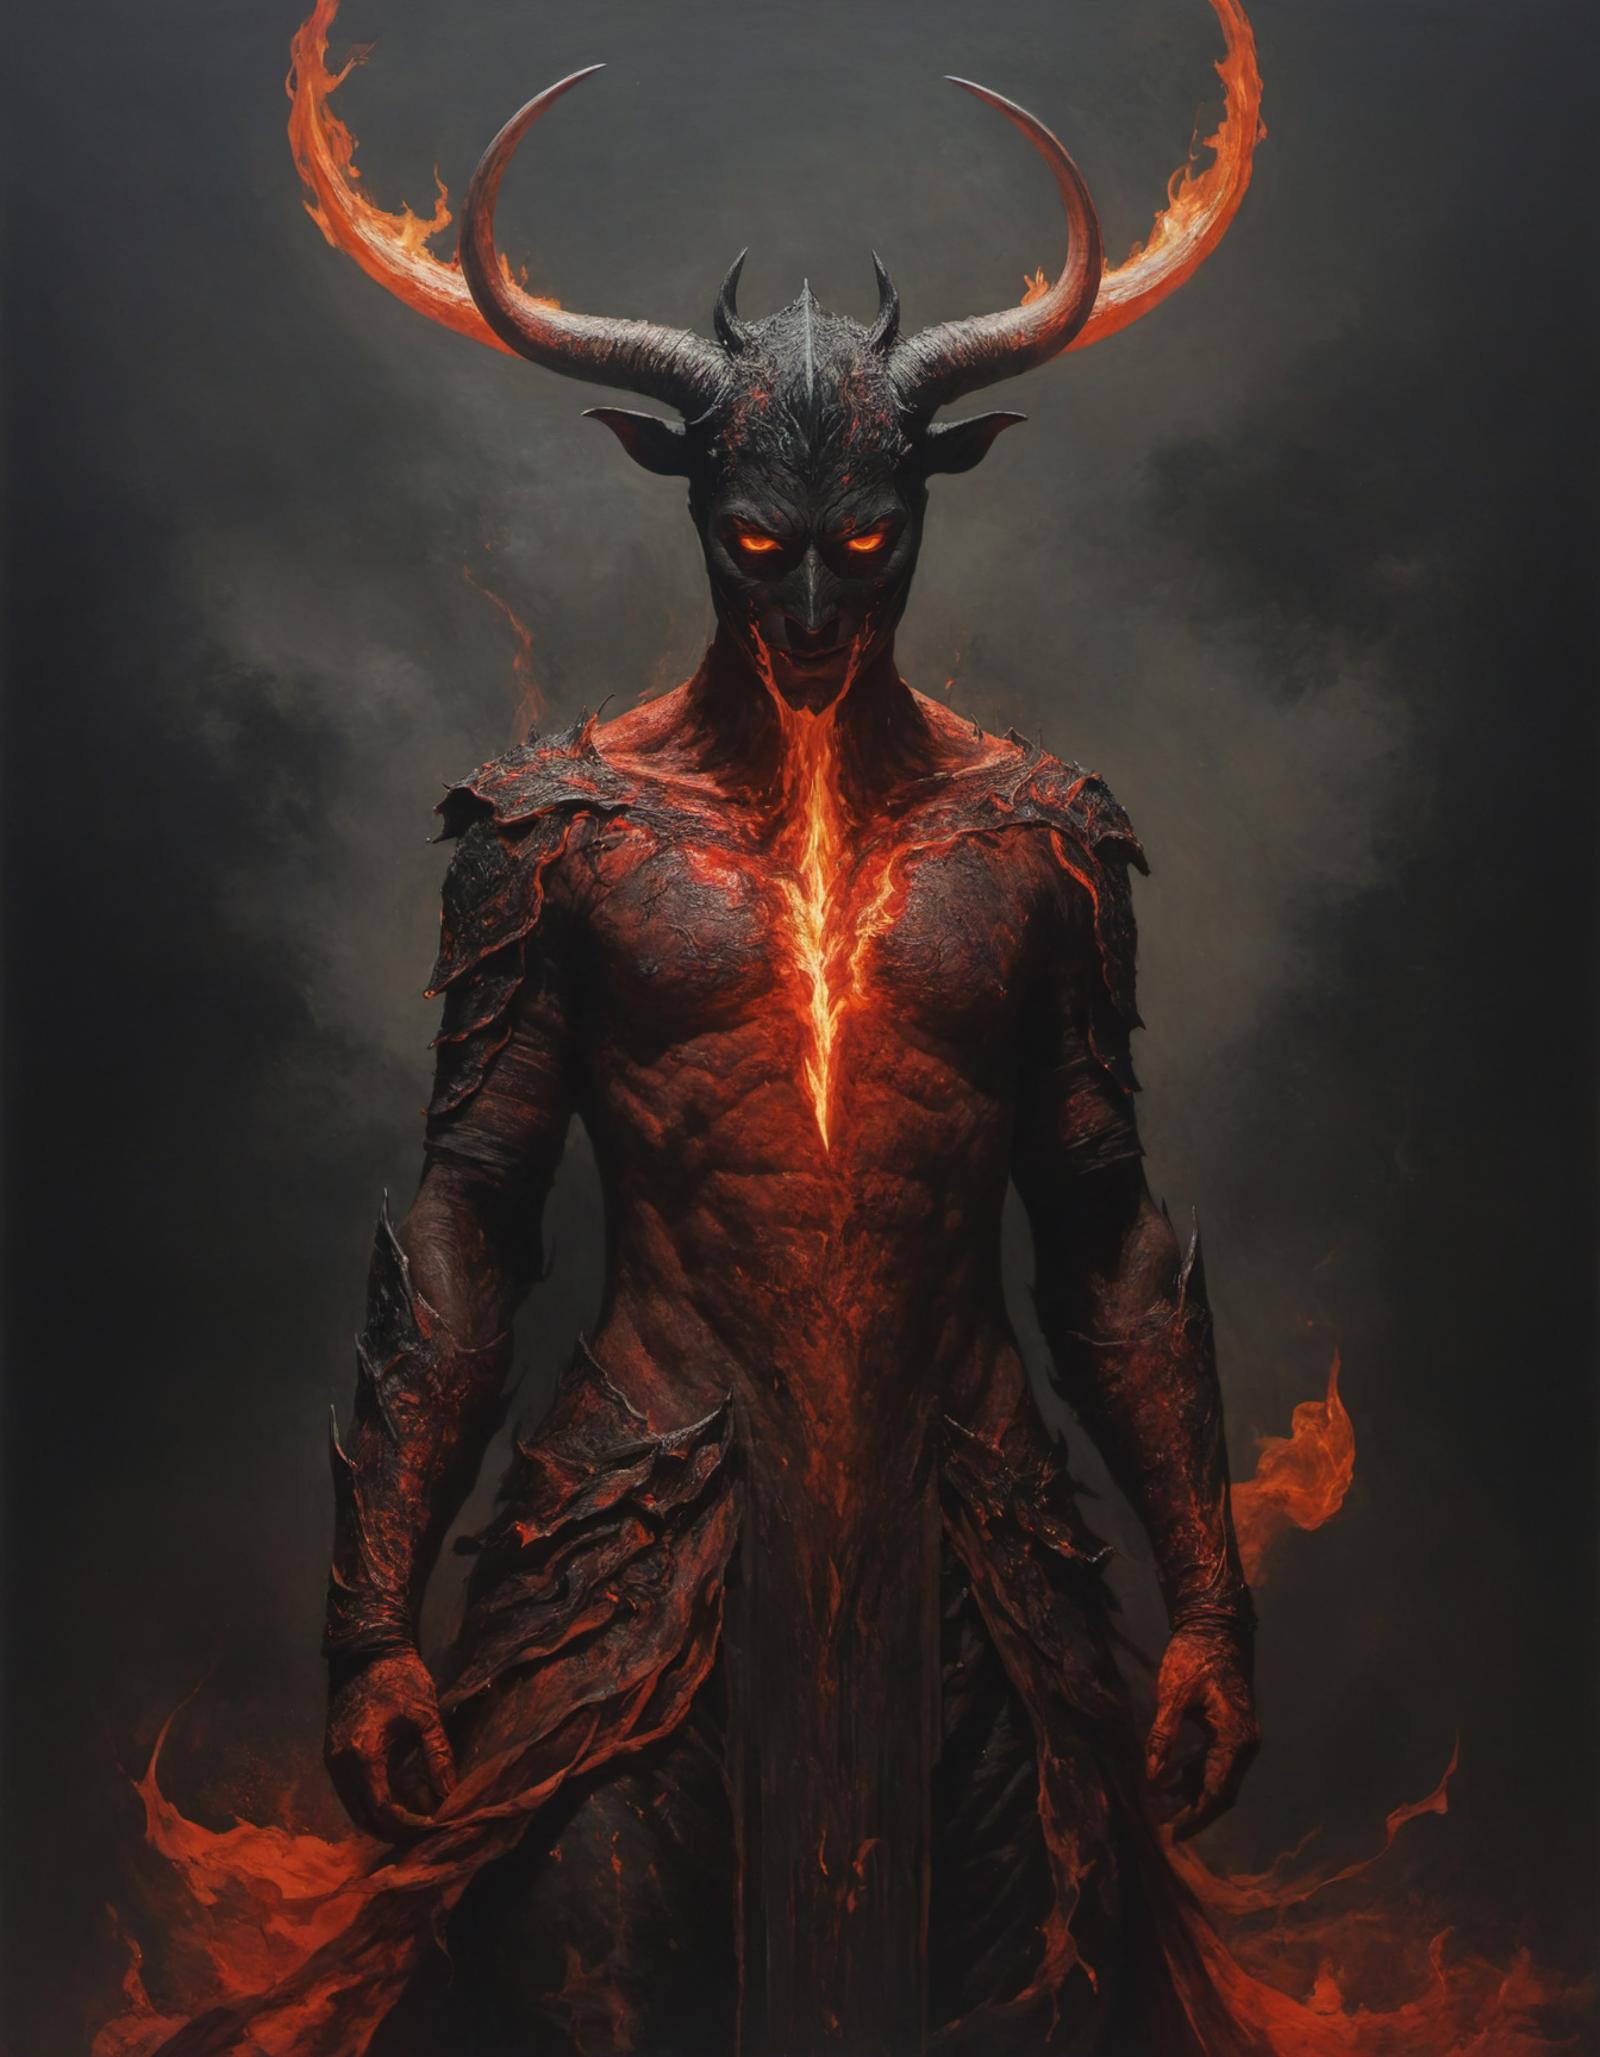 A demon with horns and red skin, possibly the devil, is depicted in a drawing.